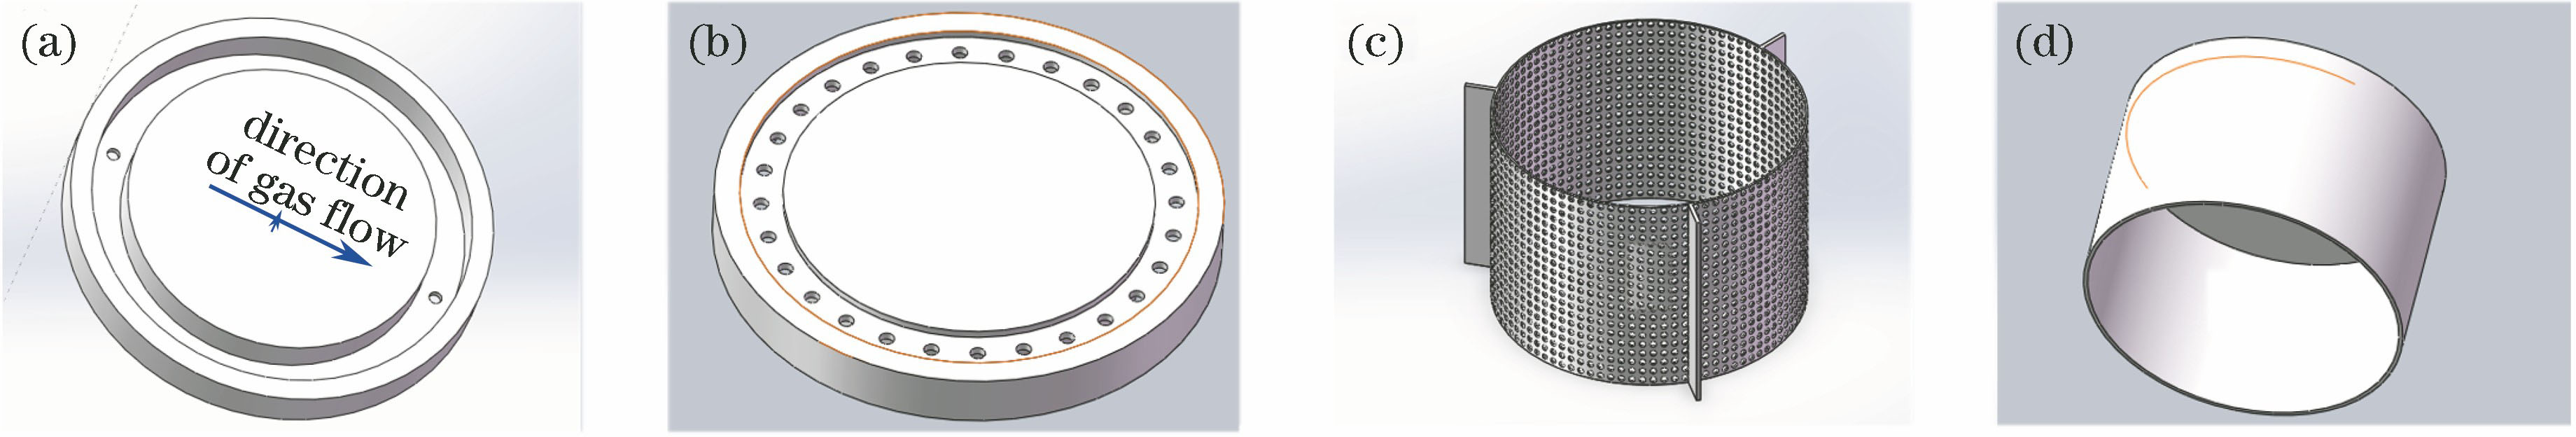 Internal structural diagram of 100-mm-diameter cylindrical reaction chamber. (a) Pedestal; (b) annular holes; (c) baffle; (d) wall of reaction chamber